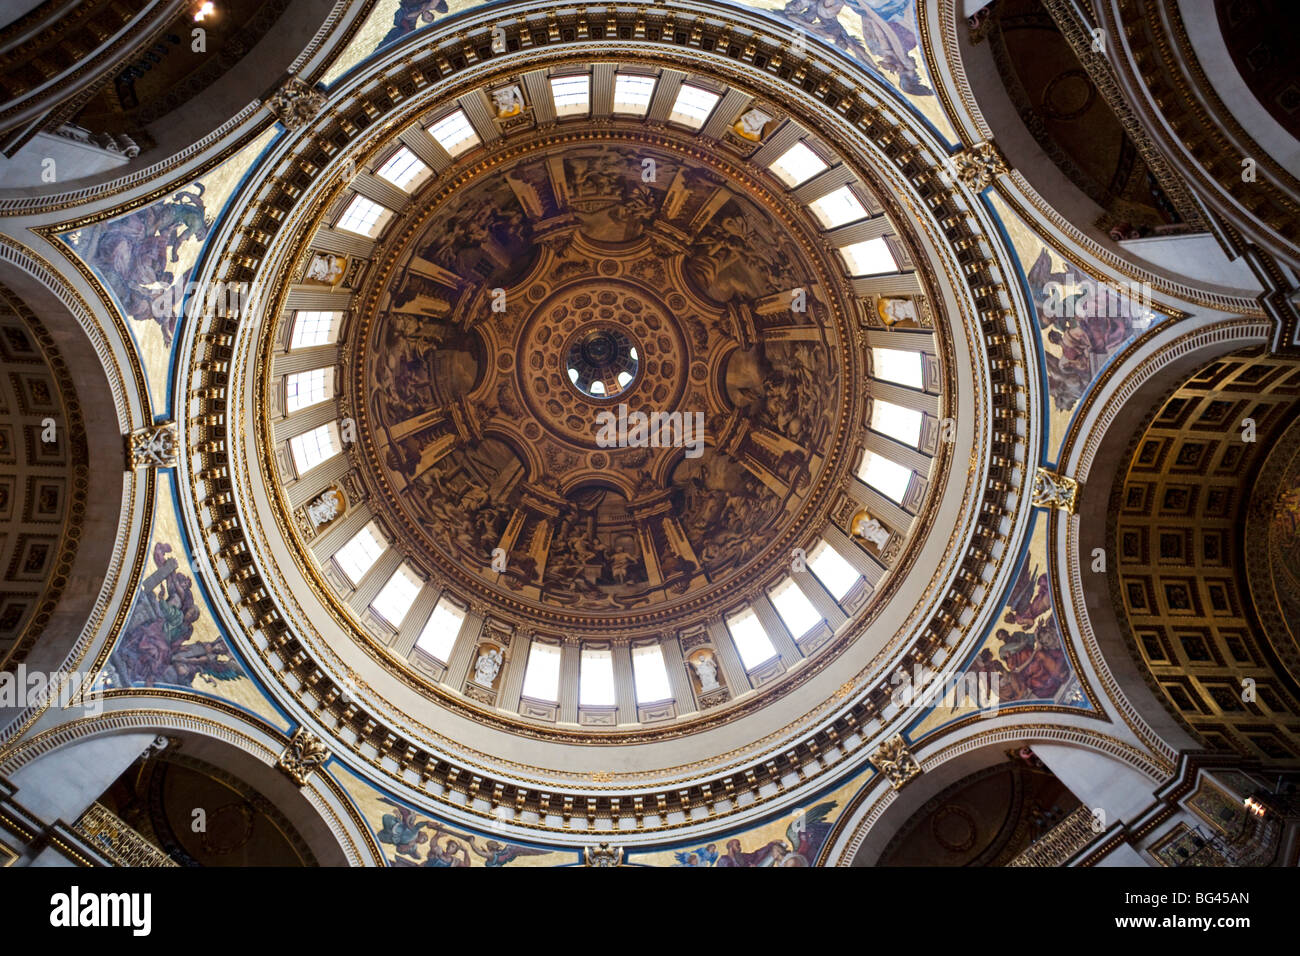 England, London, St Paul's Cathedral, The Dome and Transepts Stock Photo